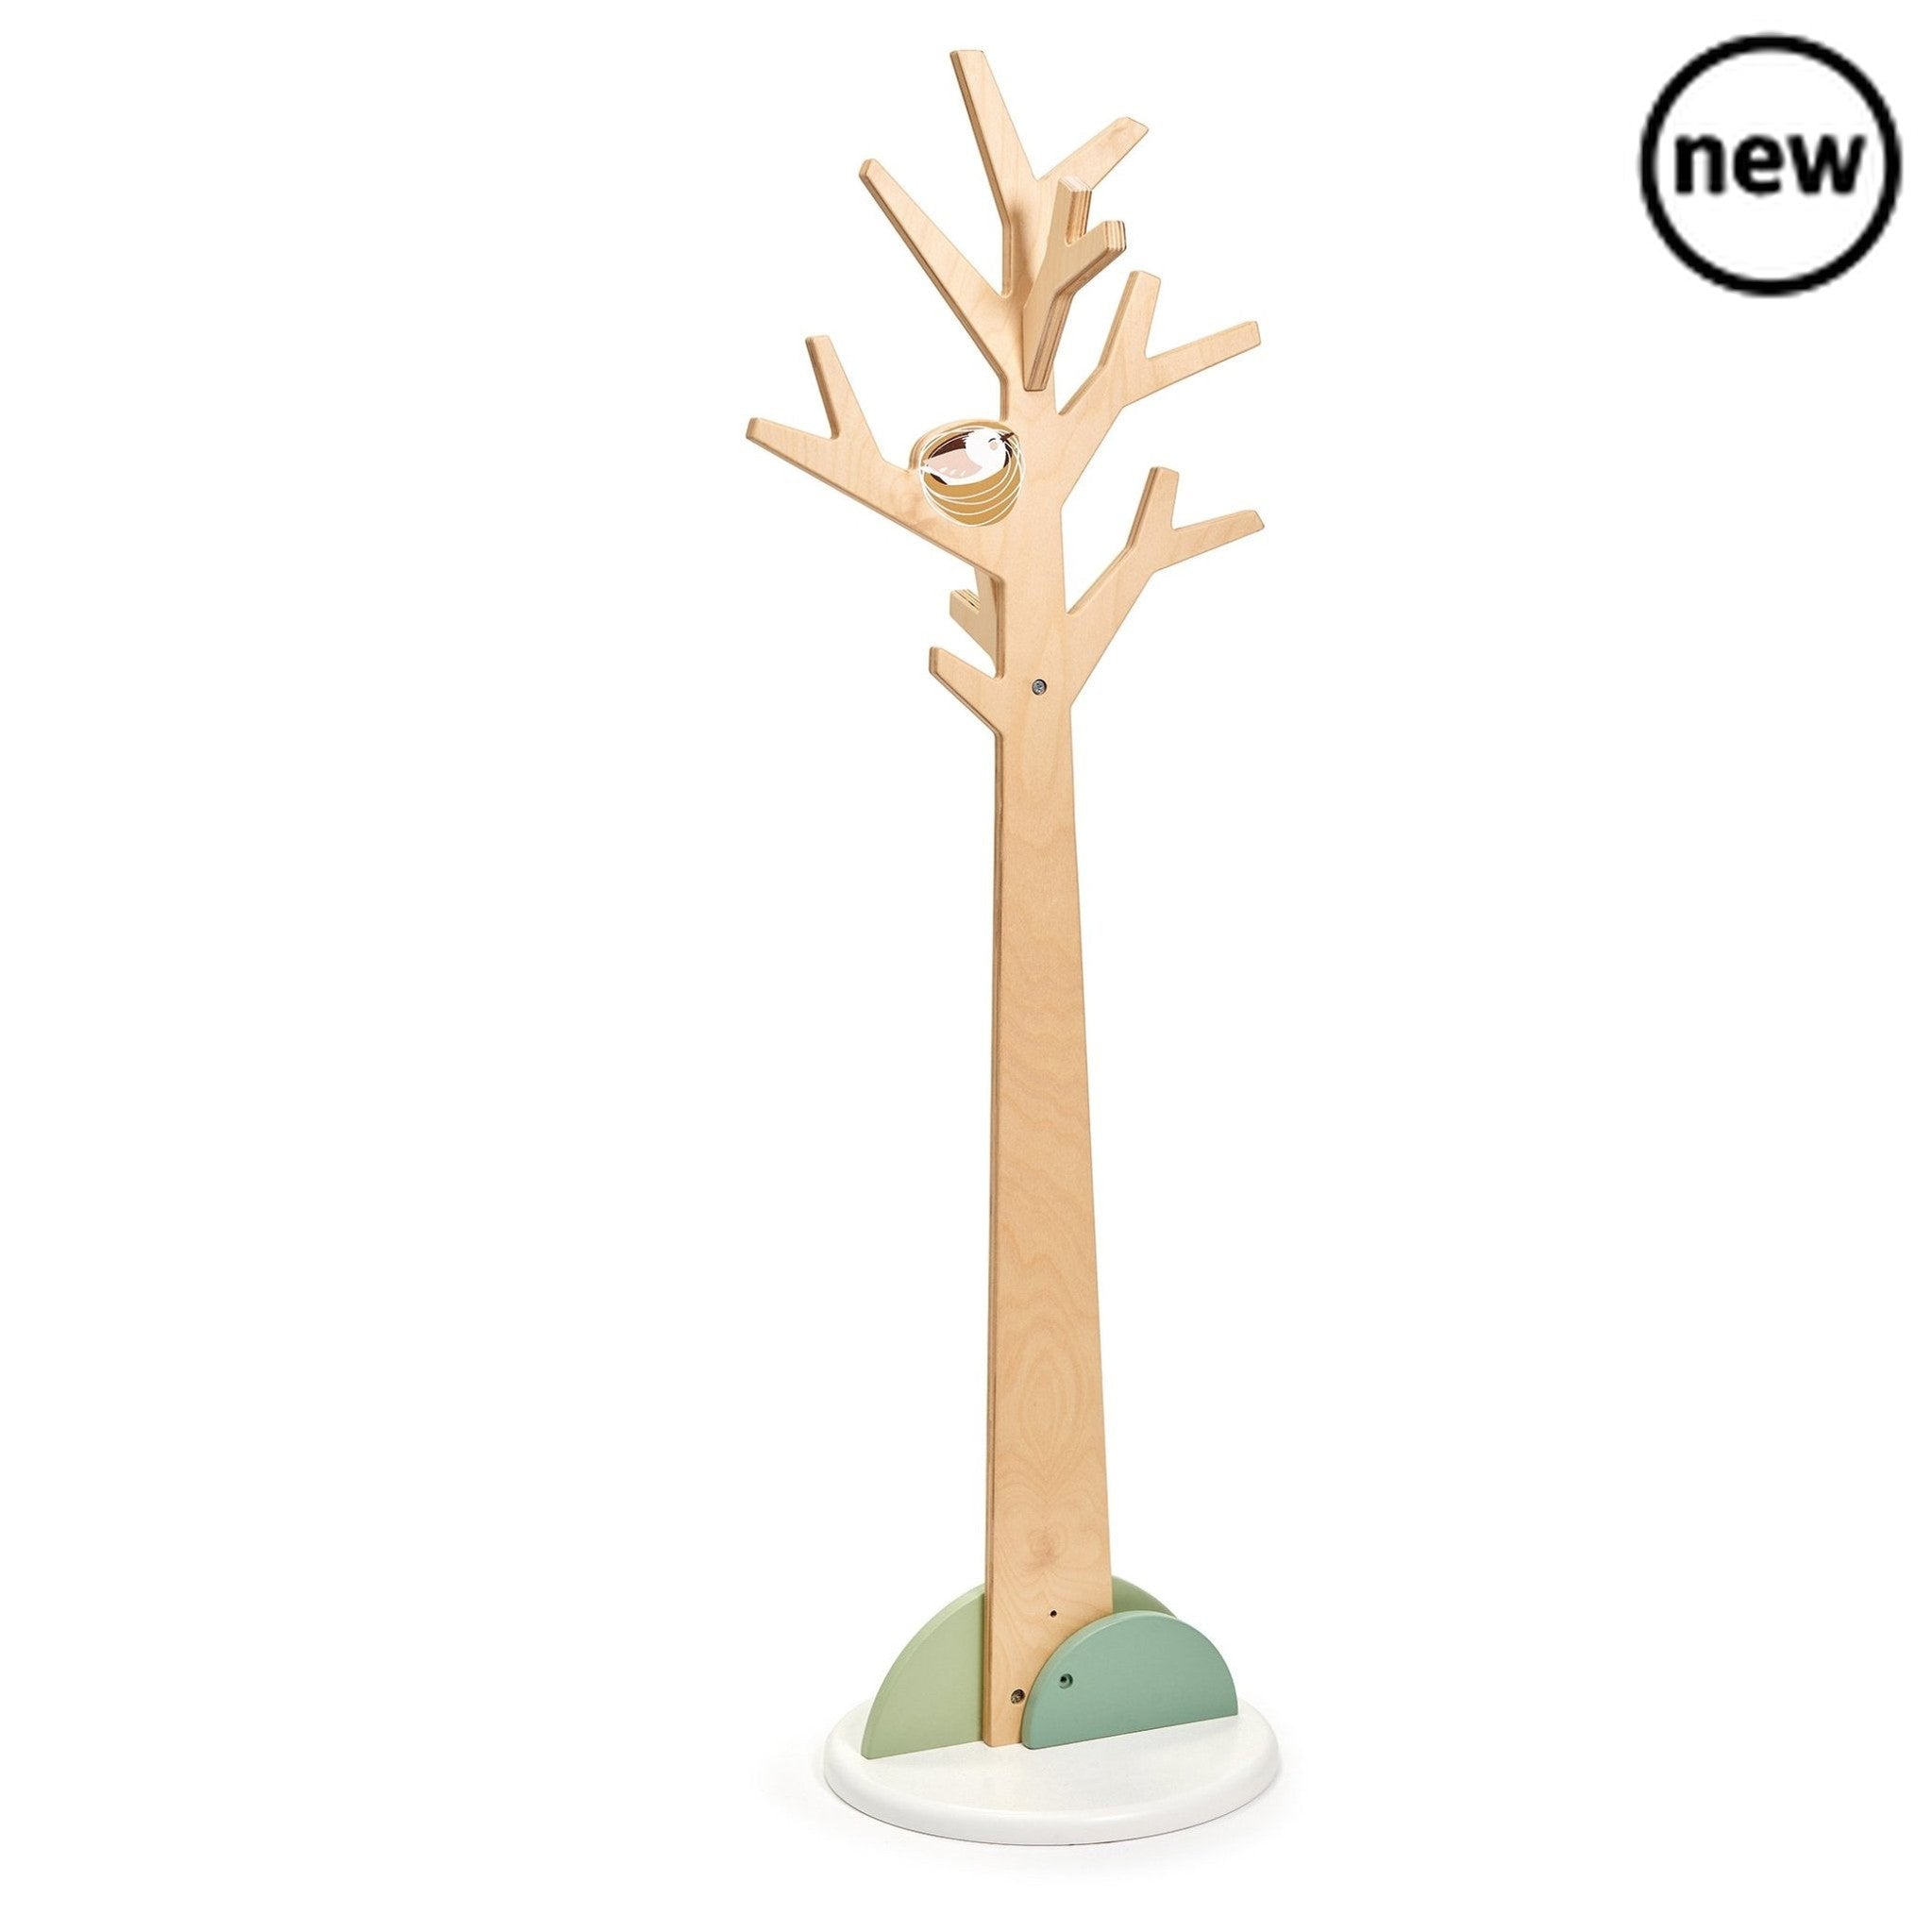 Tenderleaf Toys Forest Coat Stand, A great addition to the Forest Collection, this really fun and stylish coat stand is designed with small children in mind. Sorry UK Only Perfect for any toddlers bedroom to hang coats and accessories. Suitable for ages: 3 years+ Product dimensions: 15.50 x 7.30 x 17.50 cm 100% plastic free, Tenderleaf Toys Forest Coat Stand,Wooden Toys,Tenderleaf, 